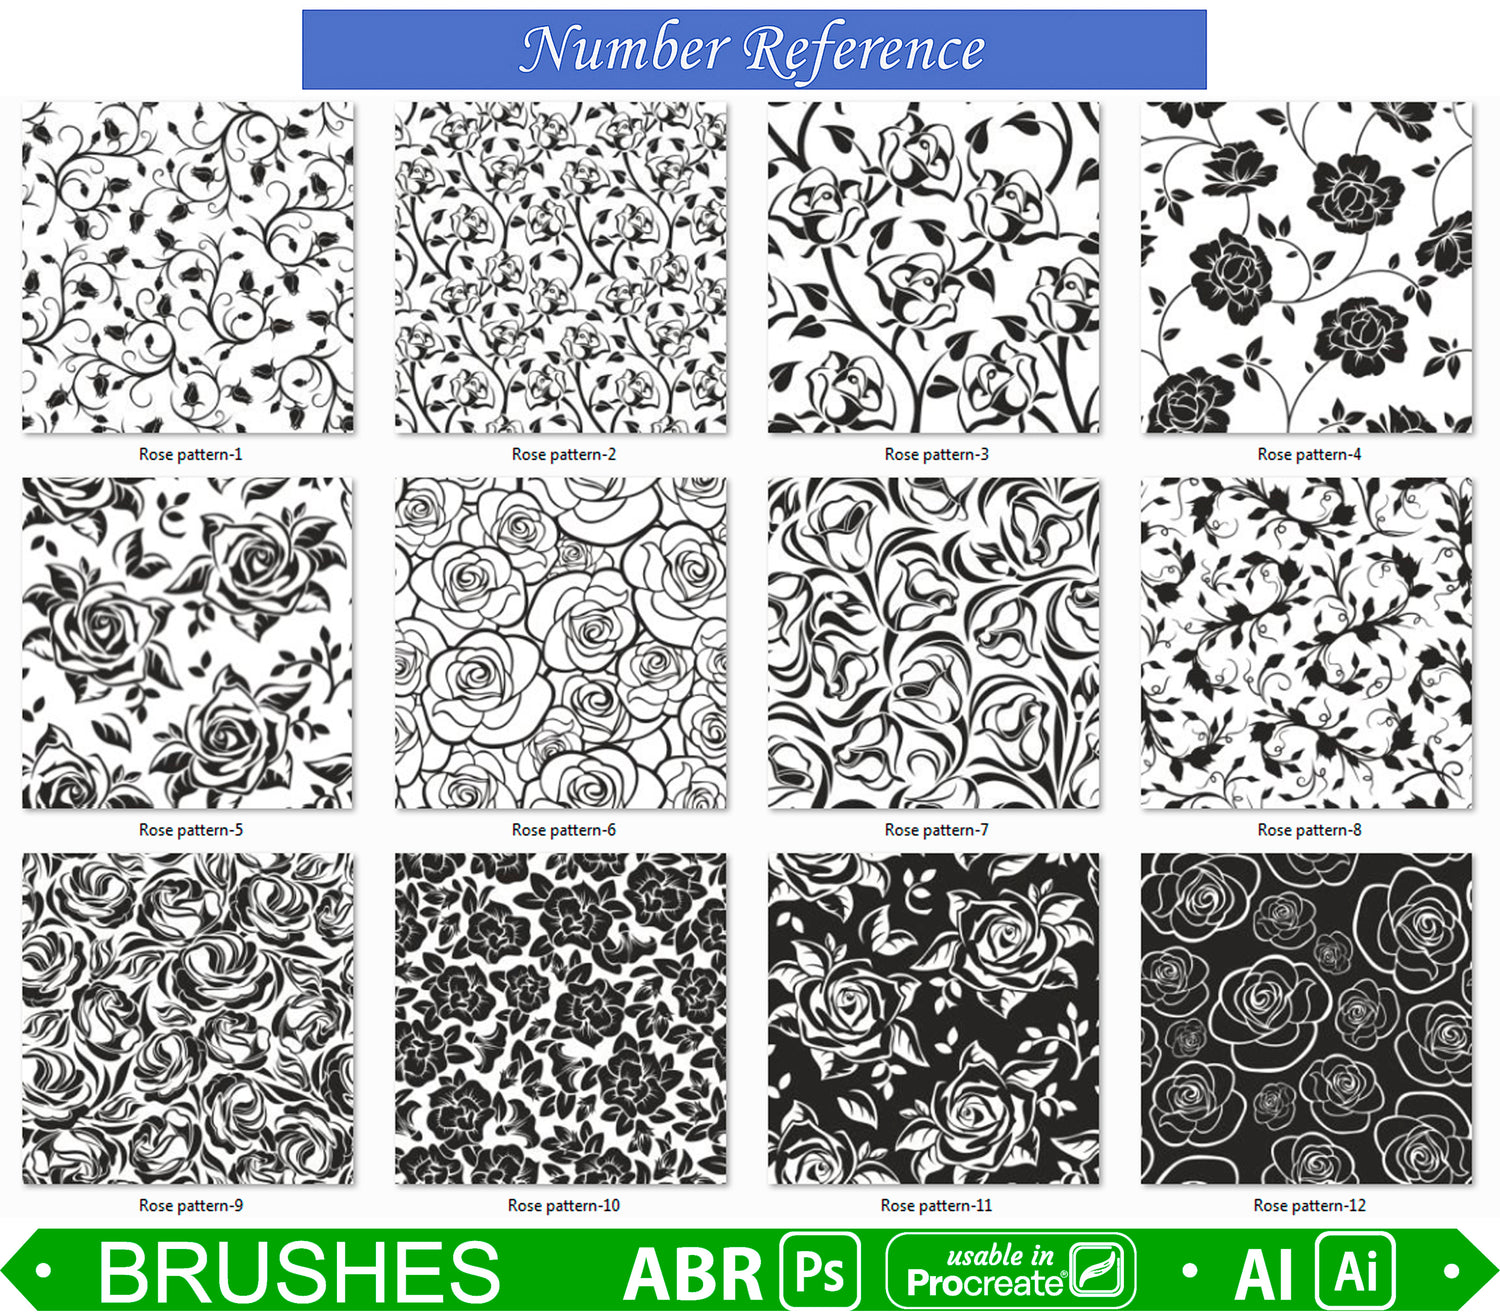 12 Seamless Floral Rose Pattern brushes for Photoshop ( Usable in Procreate 5 ) and Illustrator